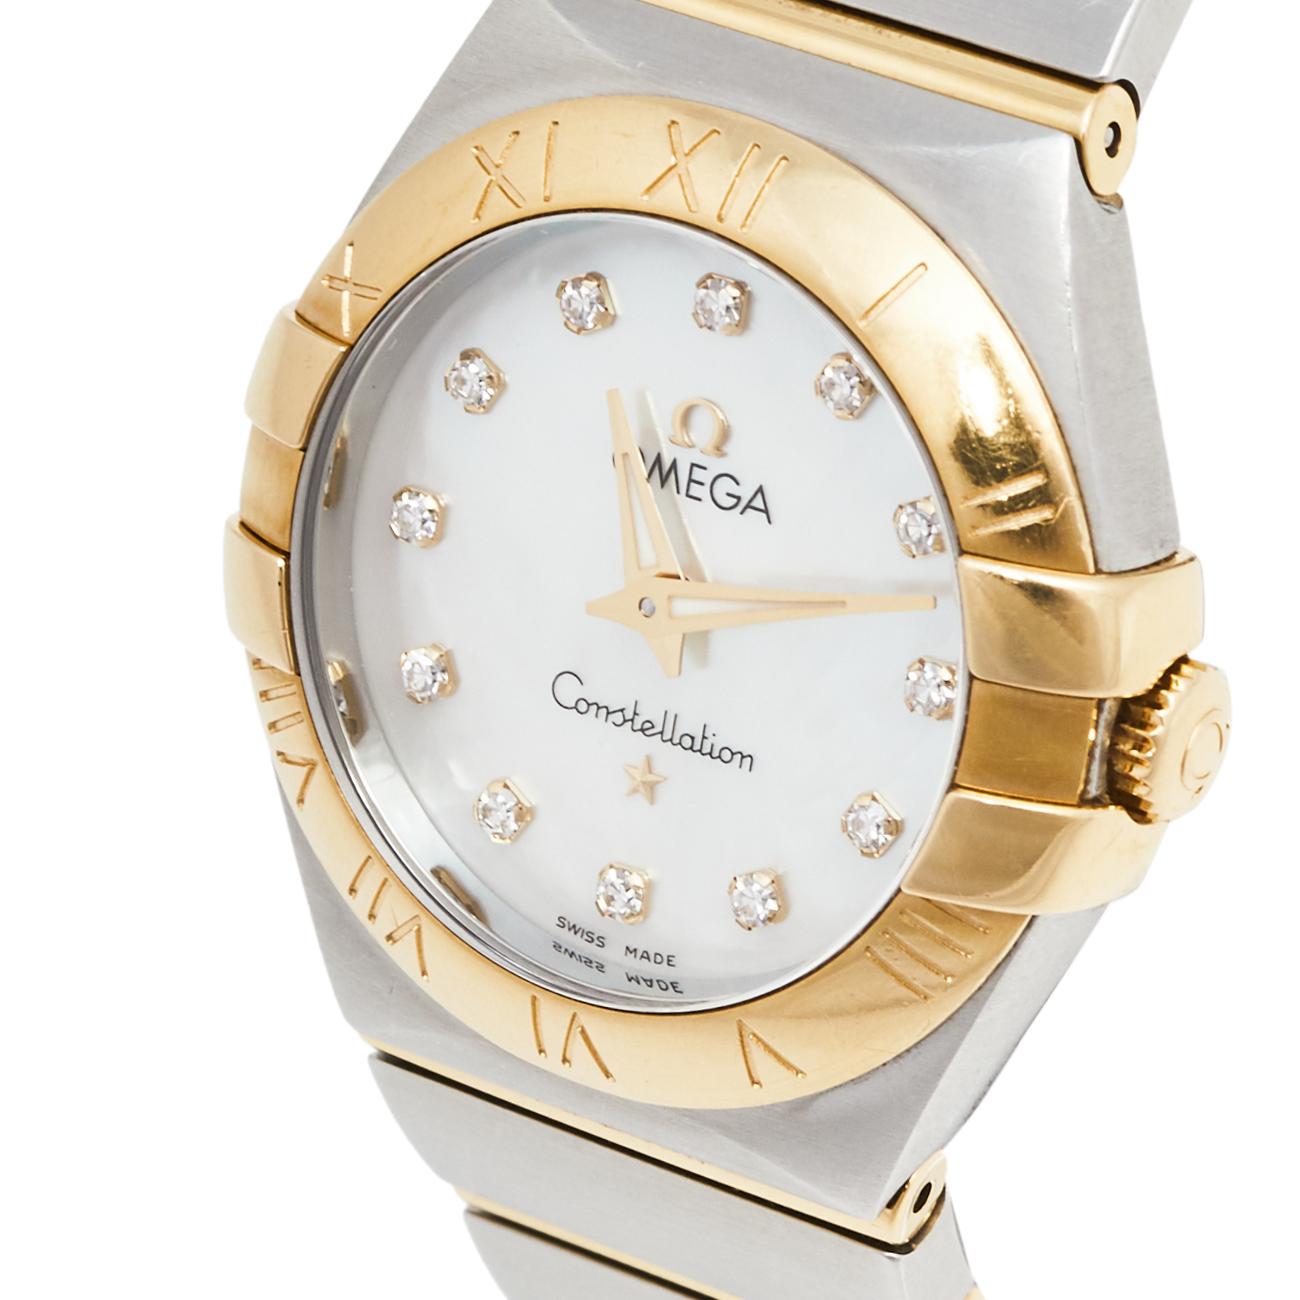 An icon from Omega, this Constellation Quartz watch for women is cast in stainless steel and 18 yellow gold. It has Roman numerals engraved on the bezel and a mother of pearl dial that holds our gaze. Set on the round dial are three gold hands and